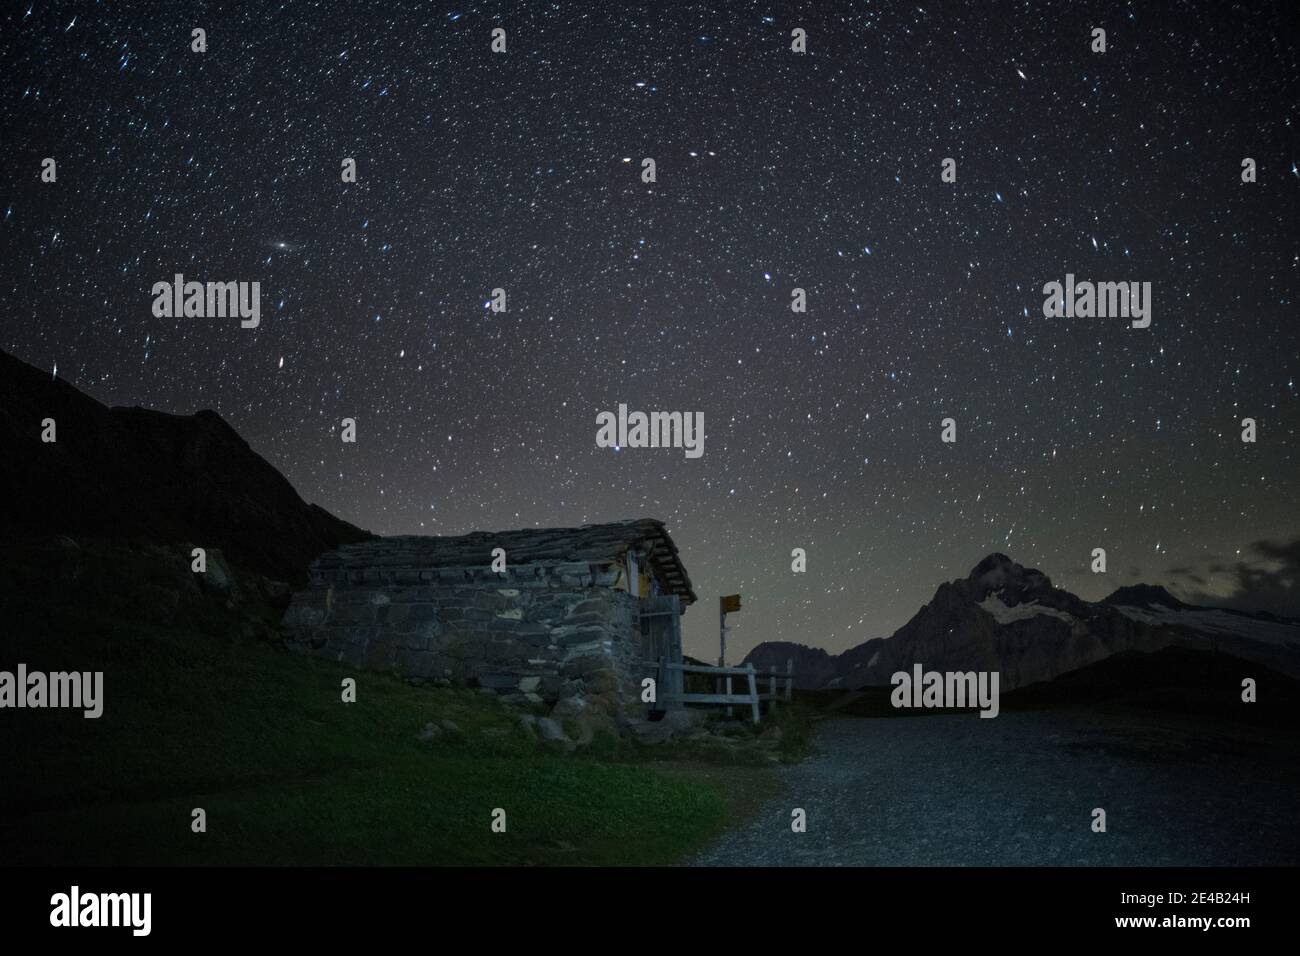 Night, starry sky, hiking trail with hut and signpost Stock Photo